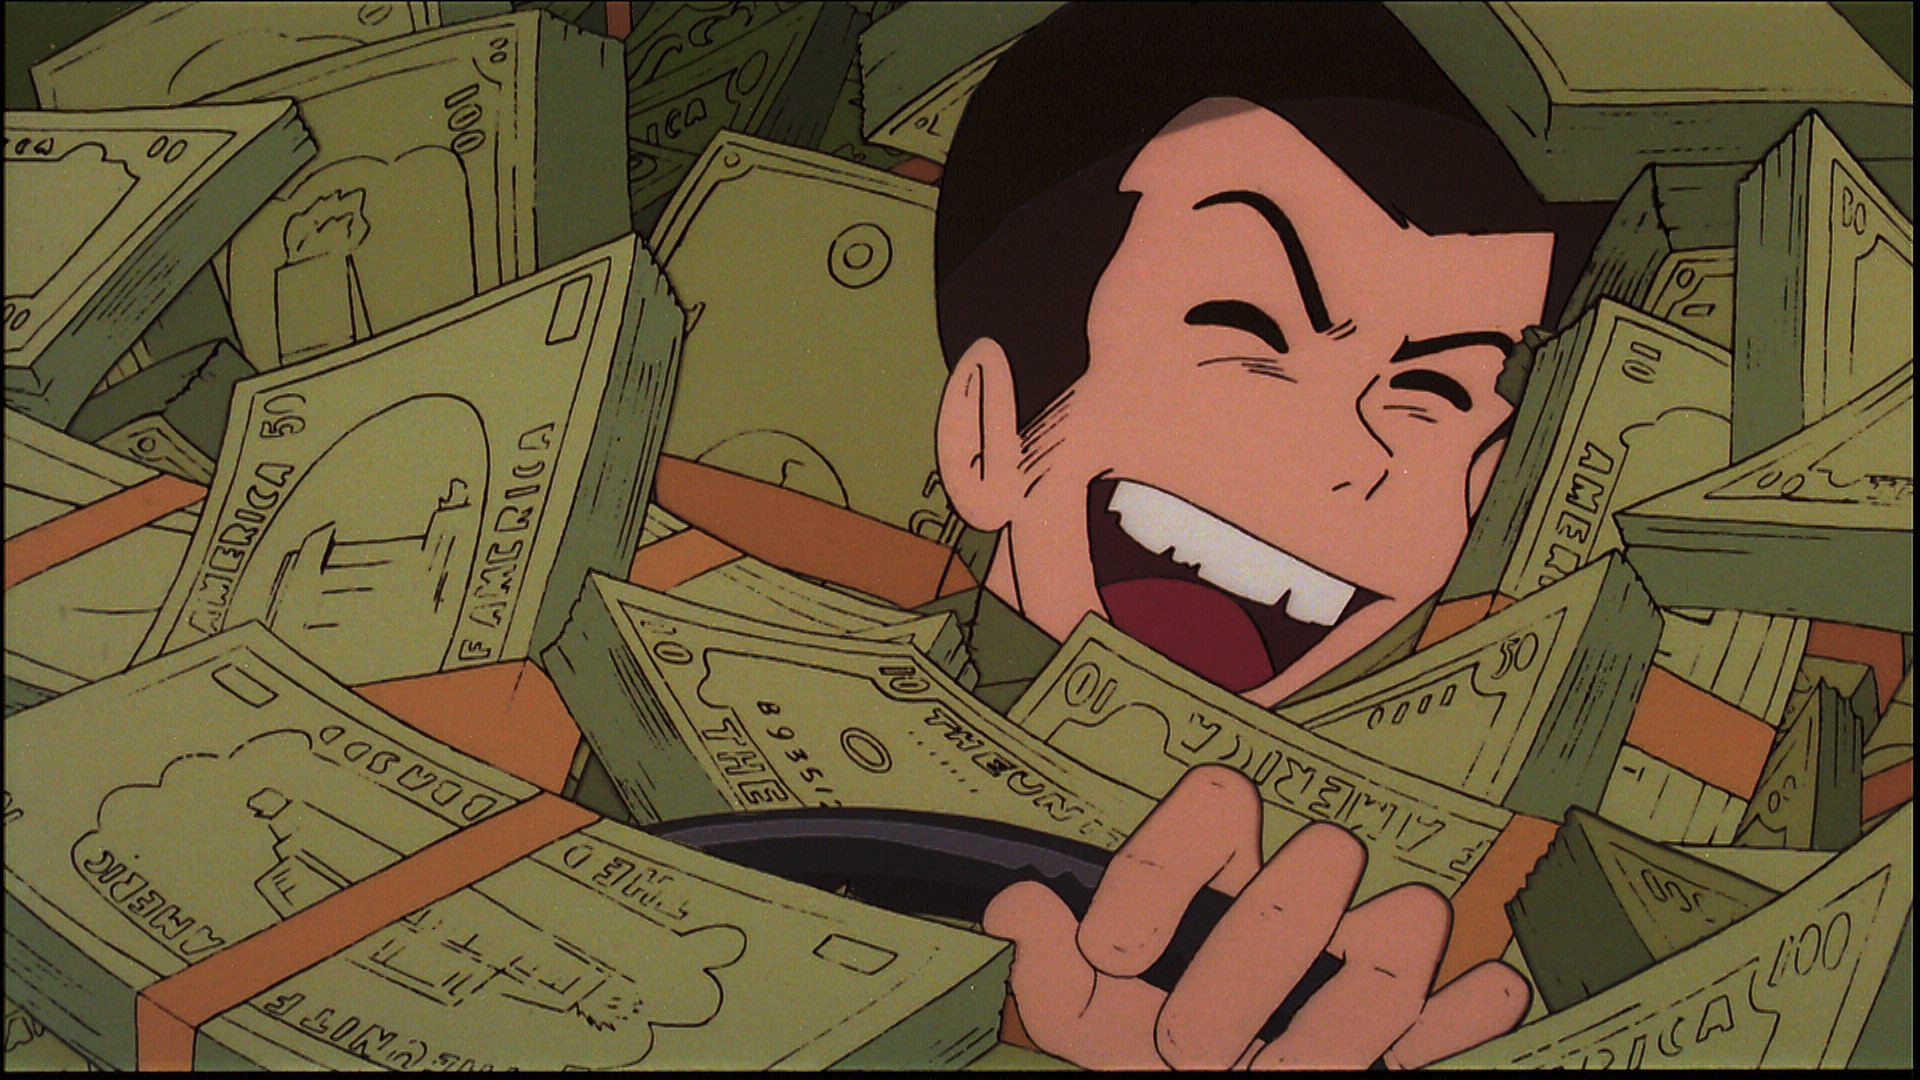 1920x1080 Lupin the Third: Castle of Cagliostro